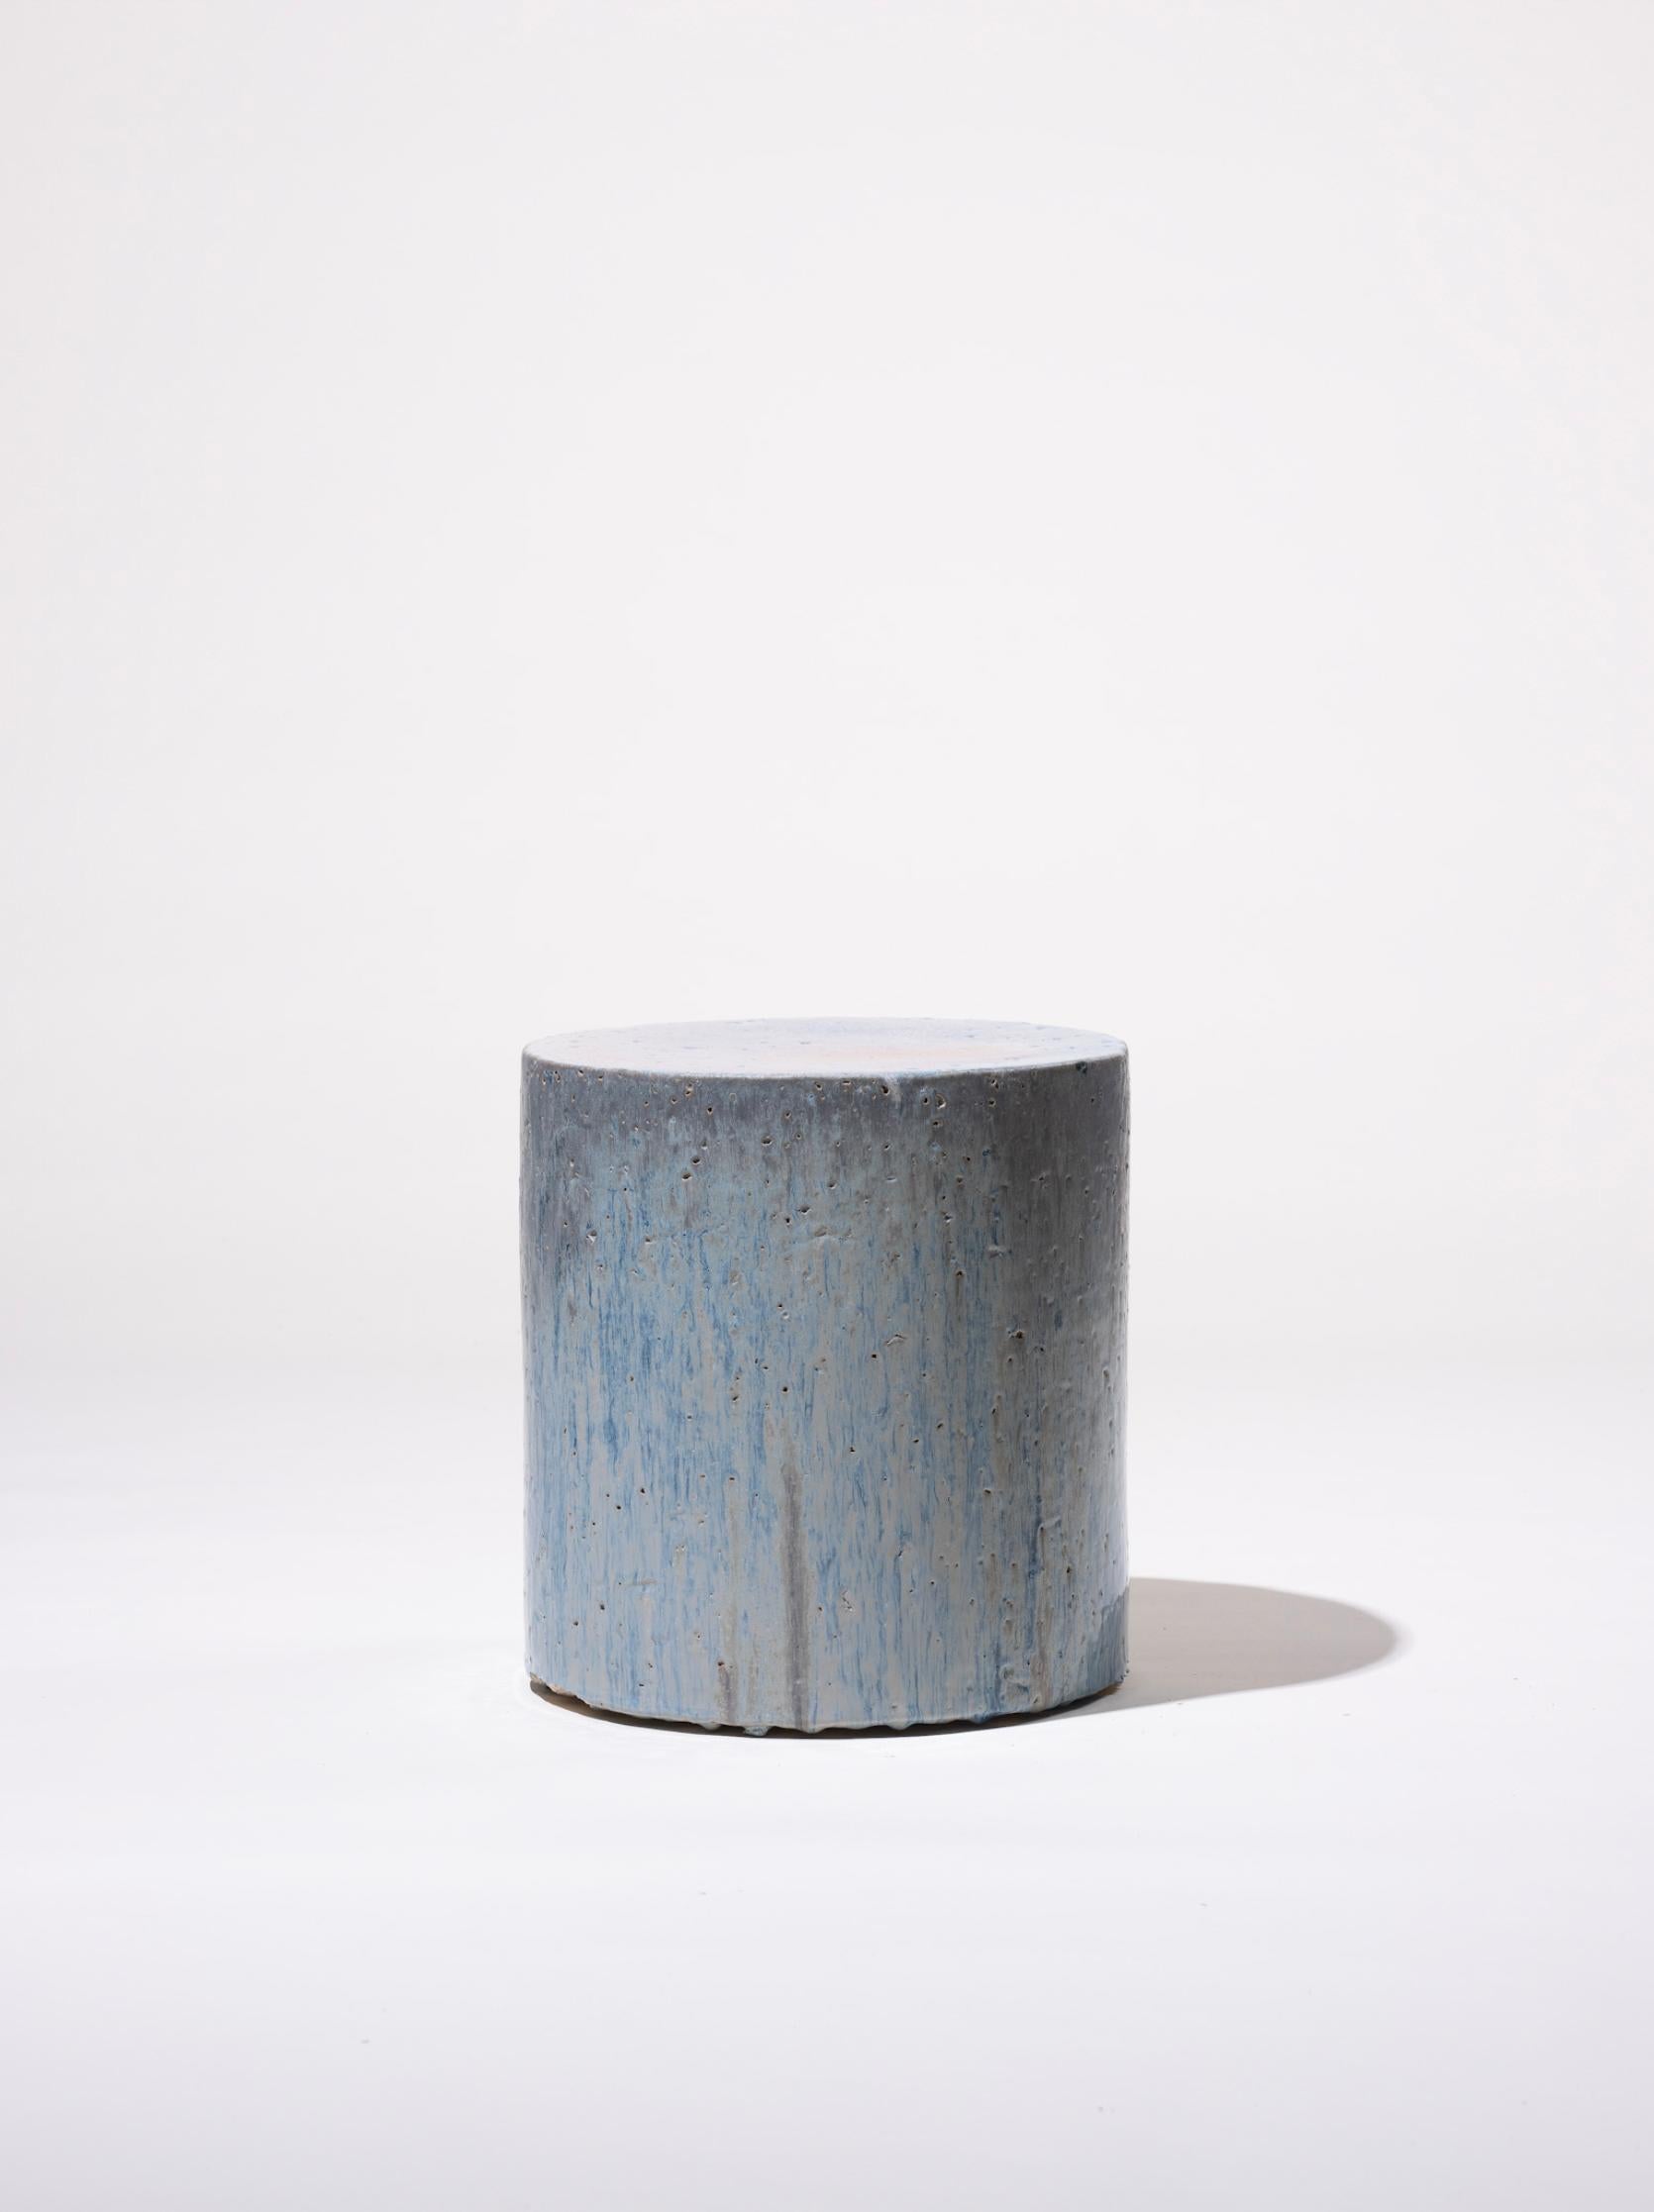 Handmade stoneware side table manufactured at the workshop of Apparatu in Barcelona. Different clay bodys are mixed with natural fibers like corn, straw, or heather straw. The pieces are casted by hand, creating a thick and strong clay structure.